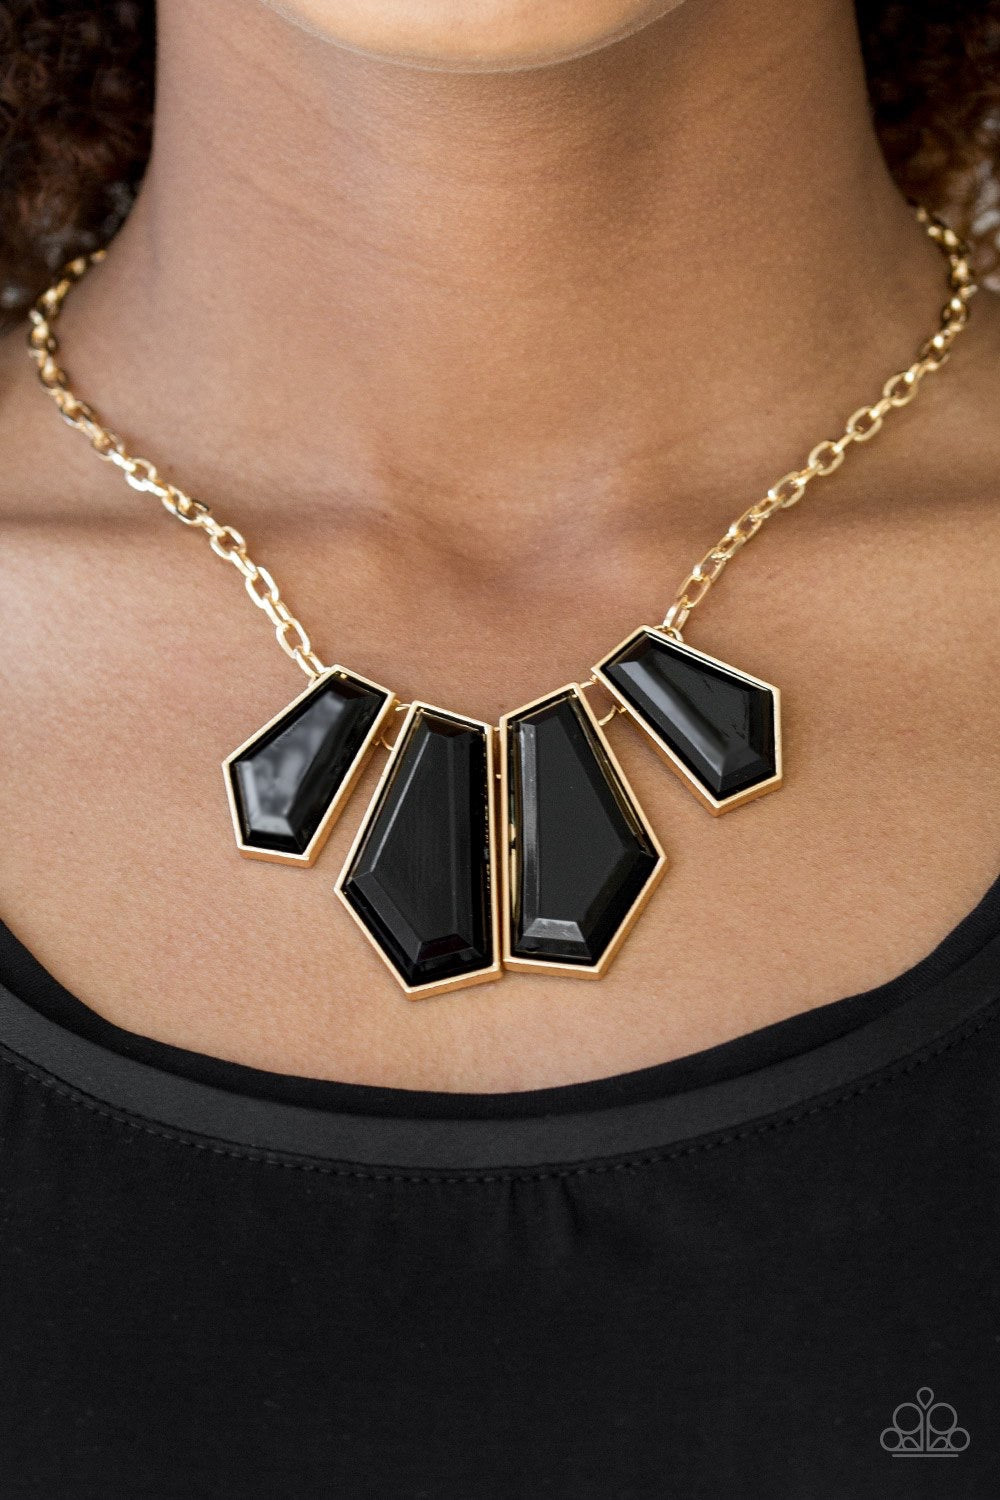 Get Up and Geo - Gold Necklace 1325n